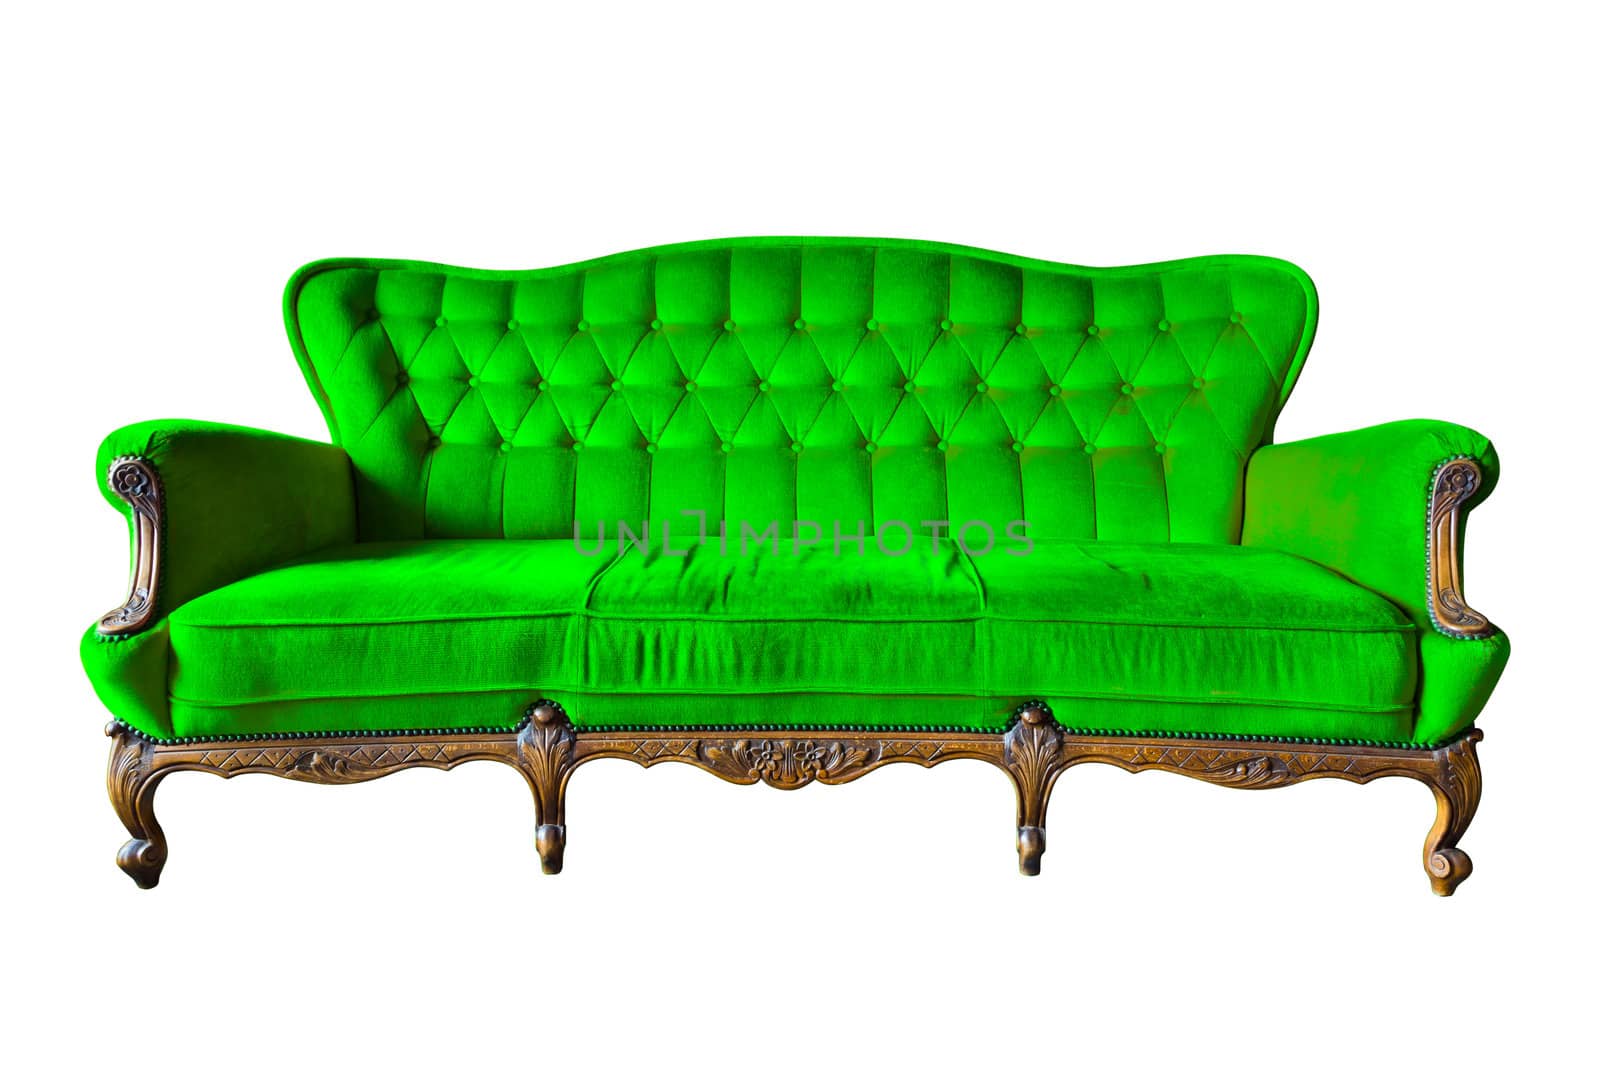 vintage green luxury armchair isolated with clipping path
